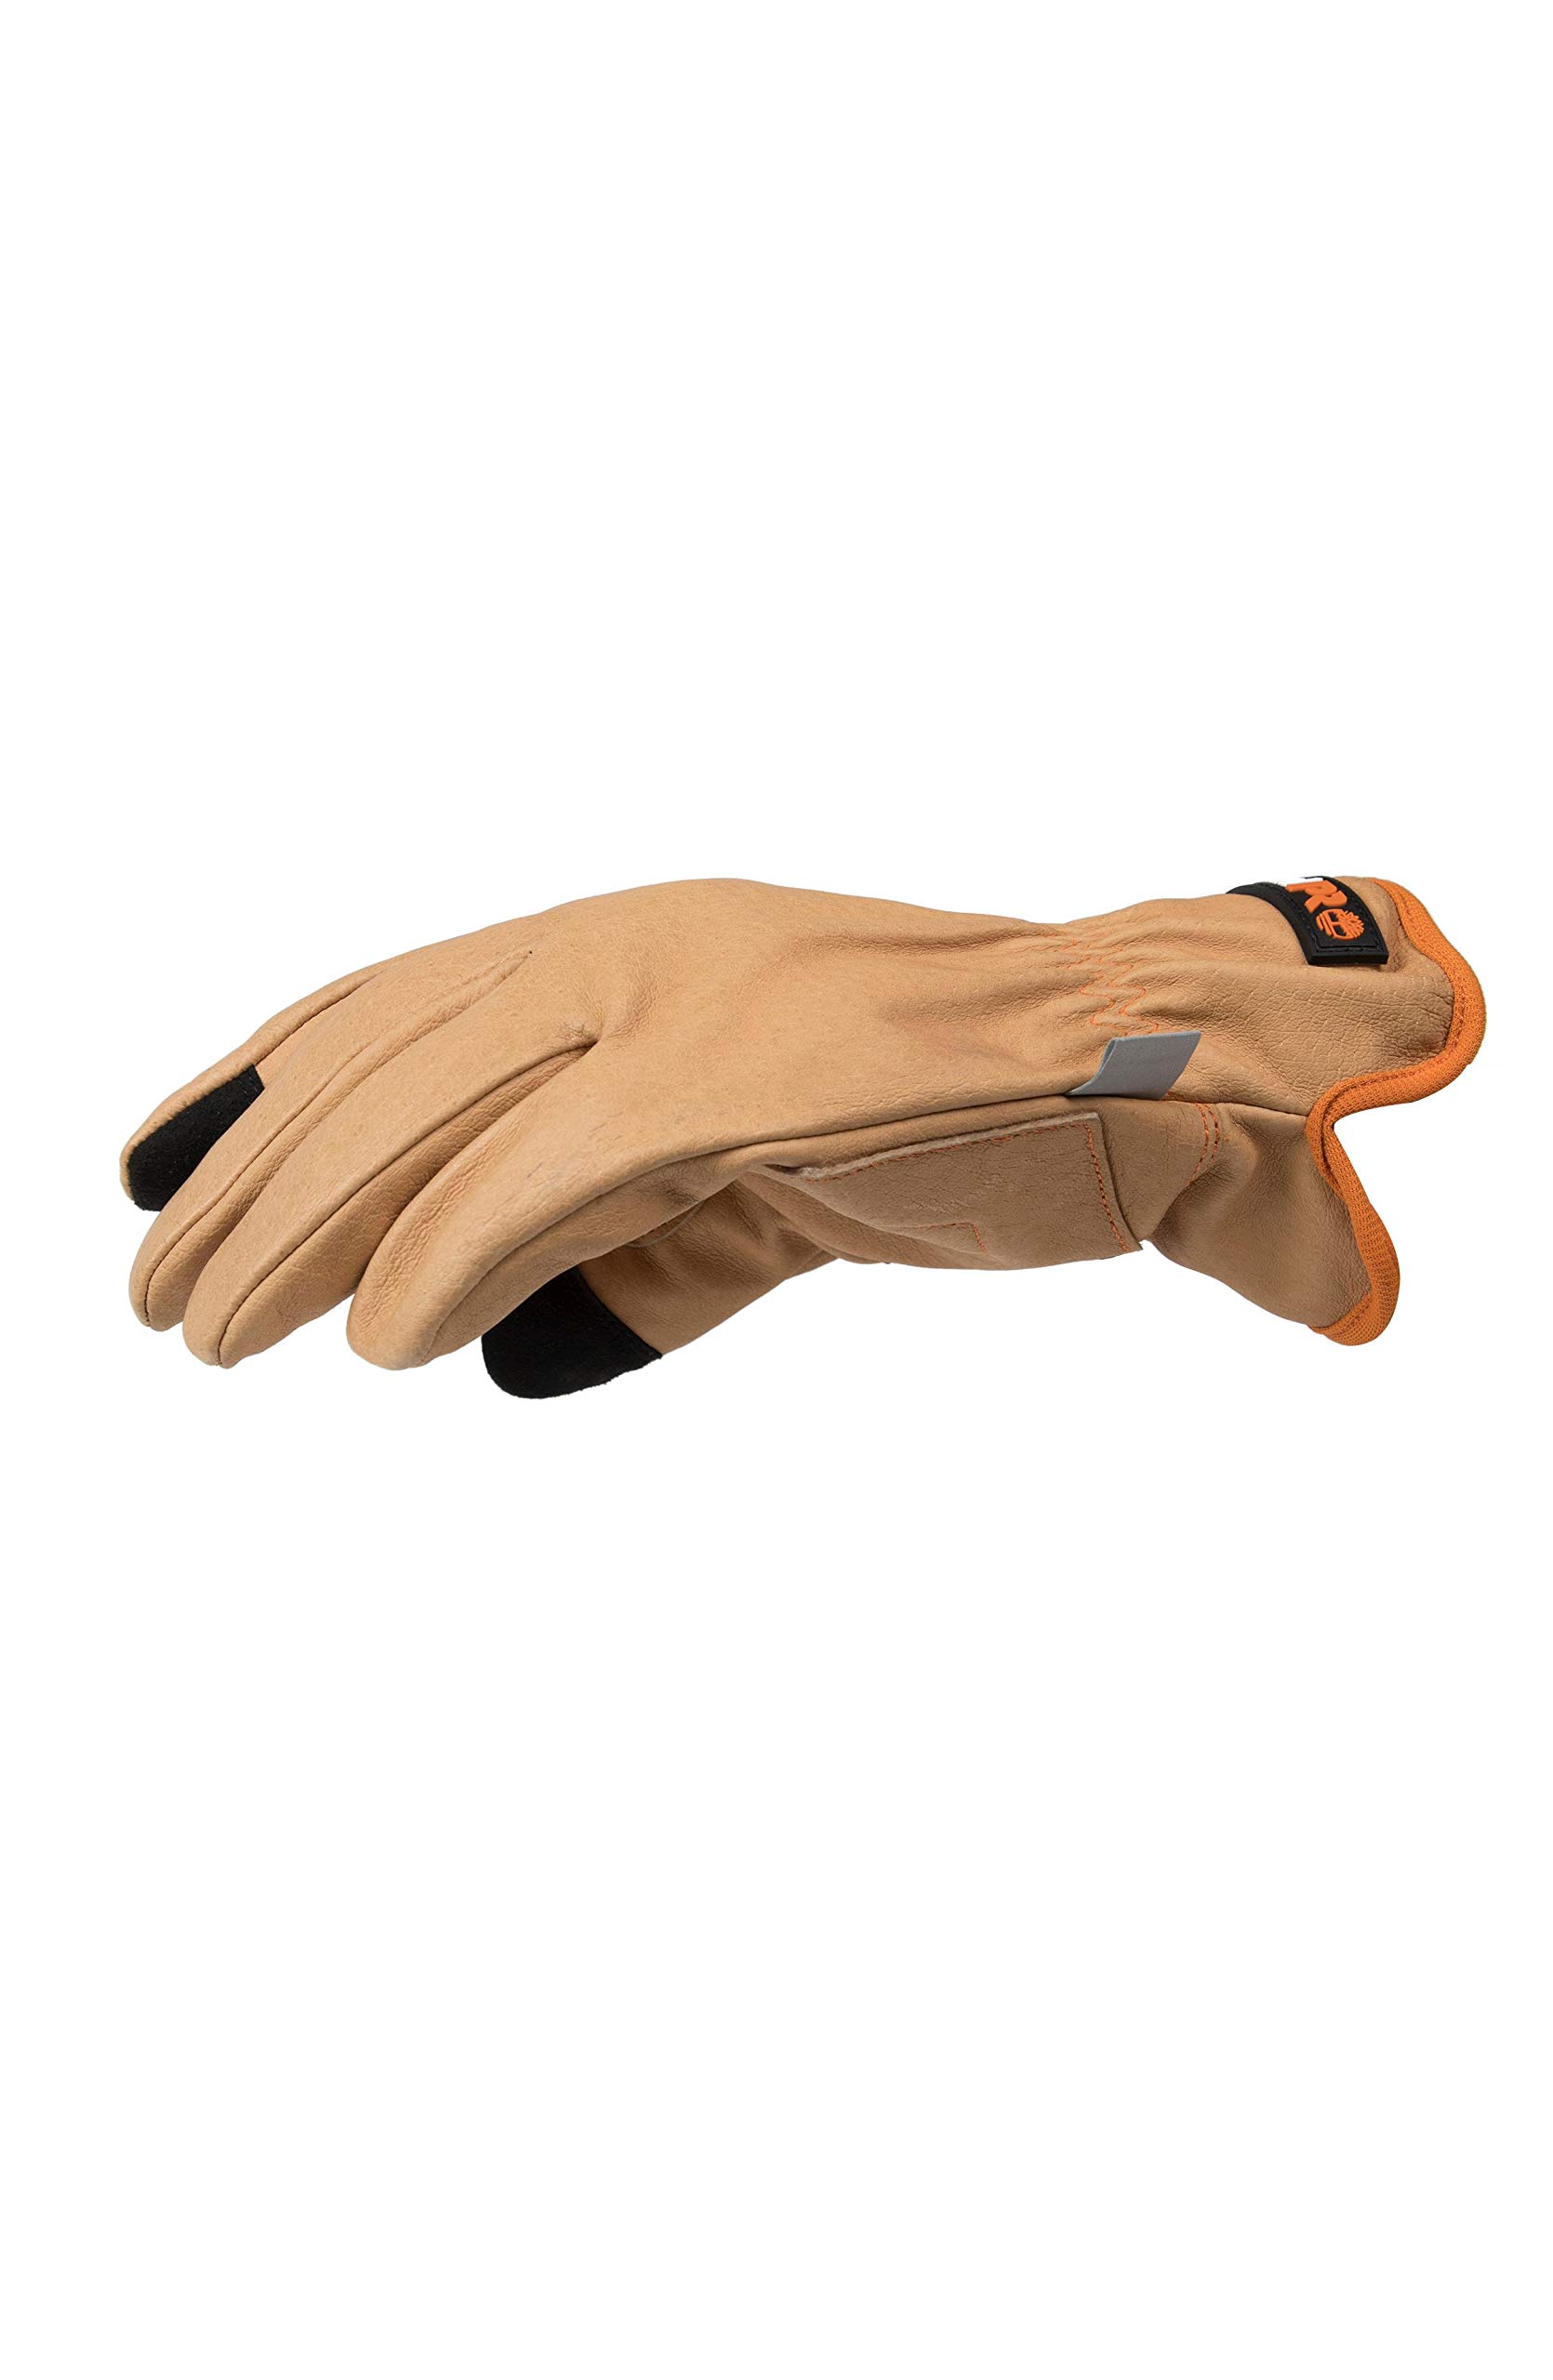 Timberland PRO Men's Leather Work Glove